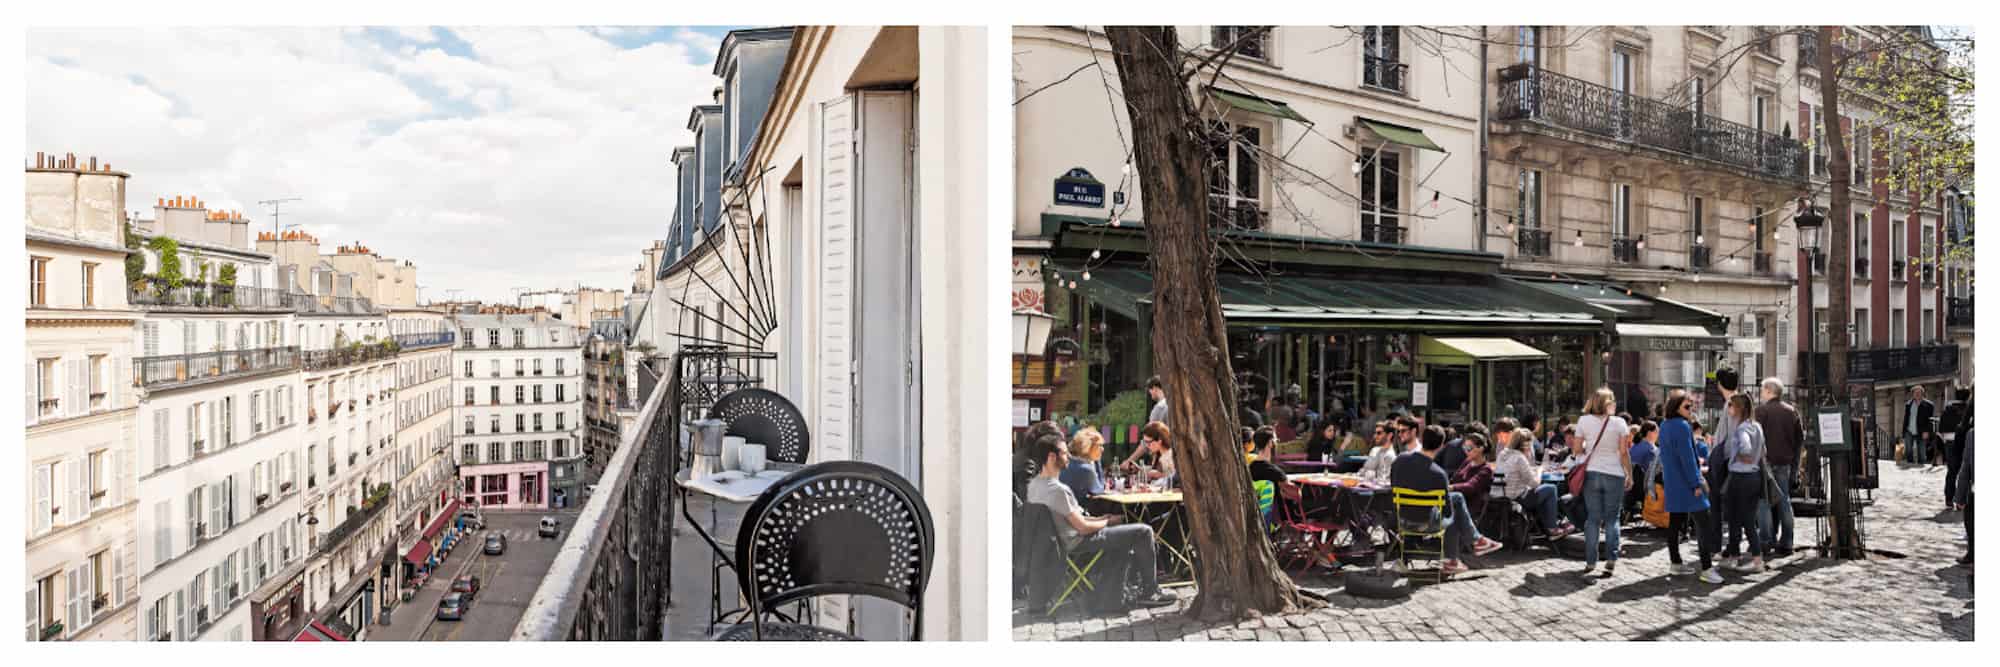 The view of a Paris street from the balcony of an apartment (left). A café in Montmartre in Paris, on a cobblestone square, where people are sat a tables outside, enjoying the sunshine (right).